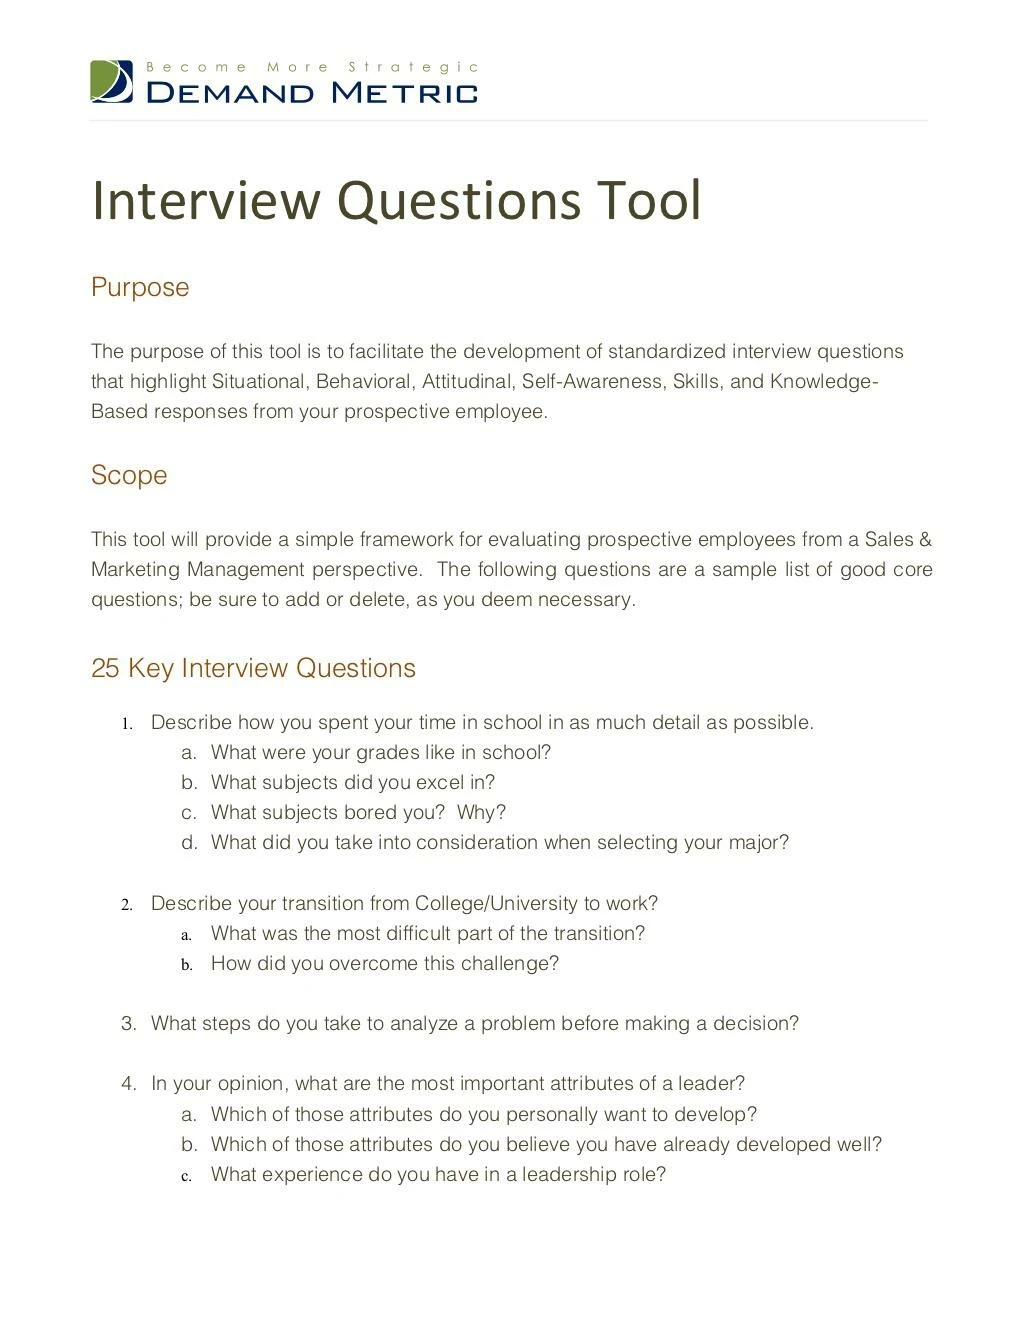 interview questions tool